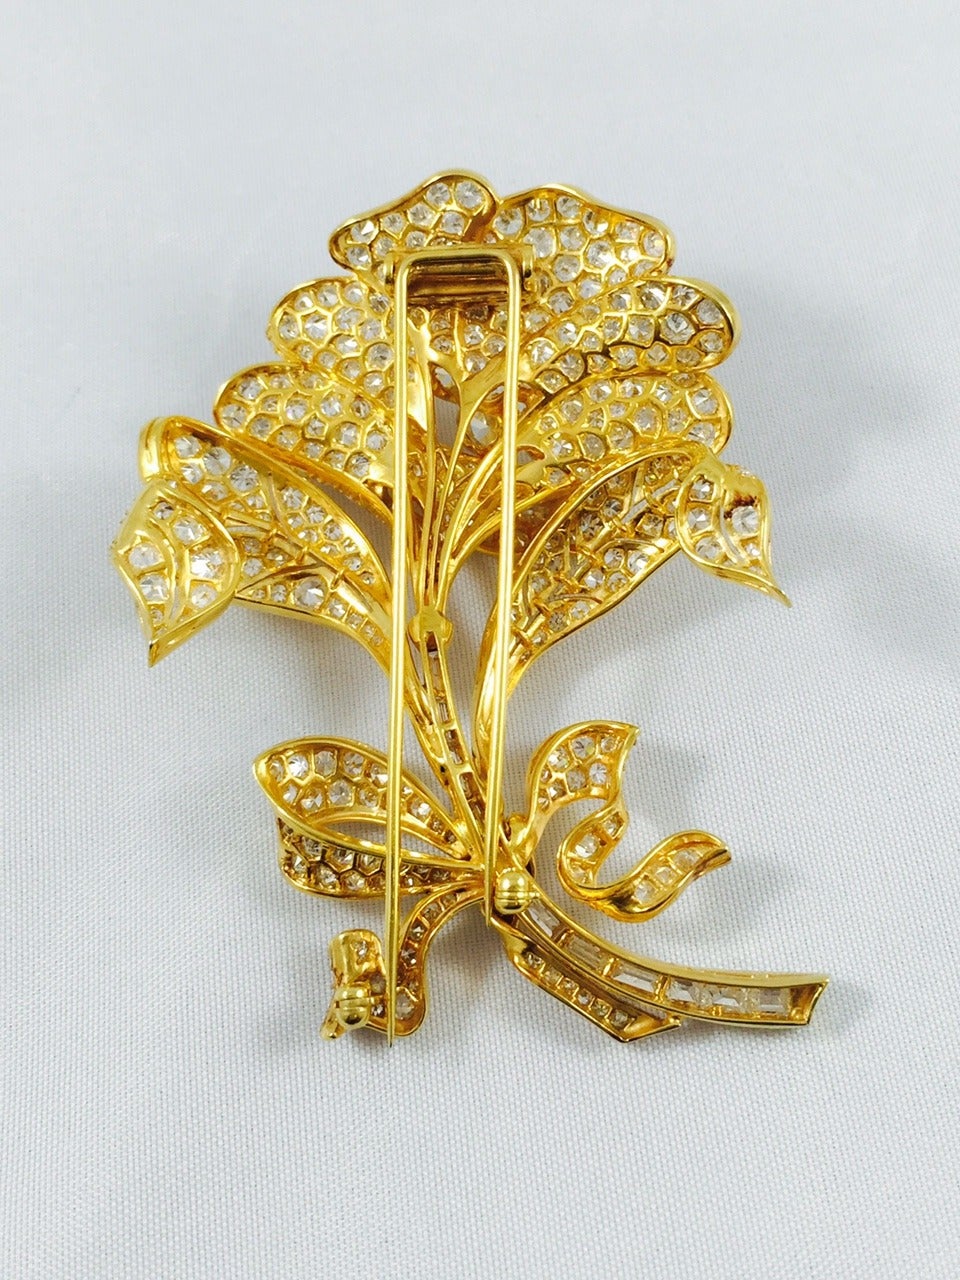 Visually exciting brooch fabricated in 18 karat yellow gold over platinum.  Sparkle abounds from every curved leaf, petal, bow and stem.  An outrageous 315 diamonds combine for an approximate total weight of 12.5 carats with G-J color, VS-I1